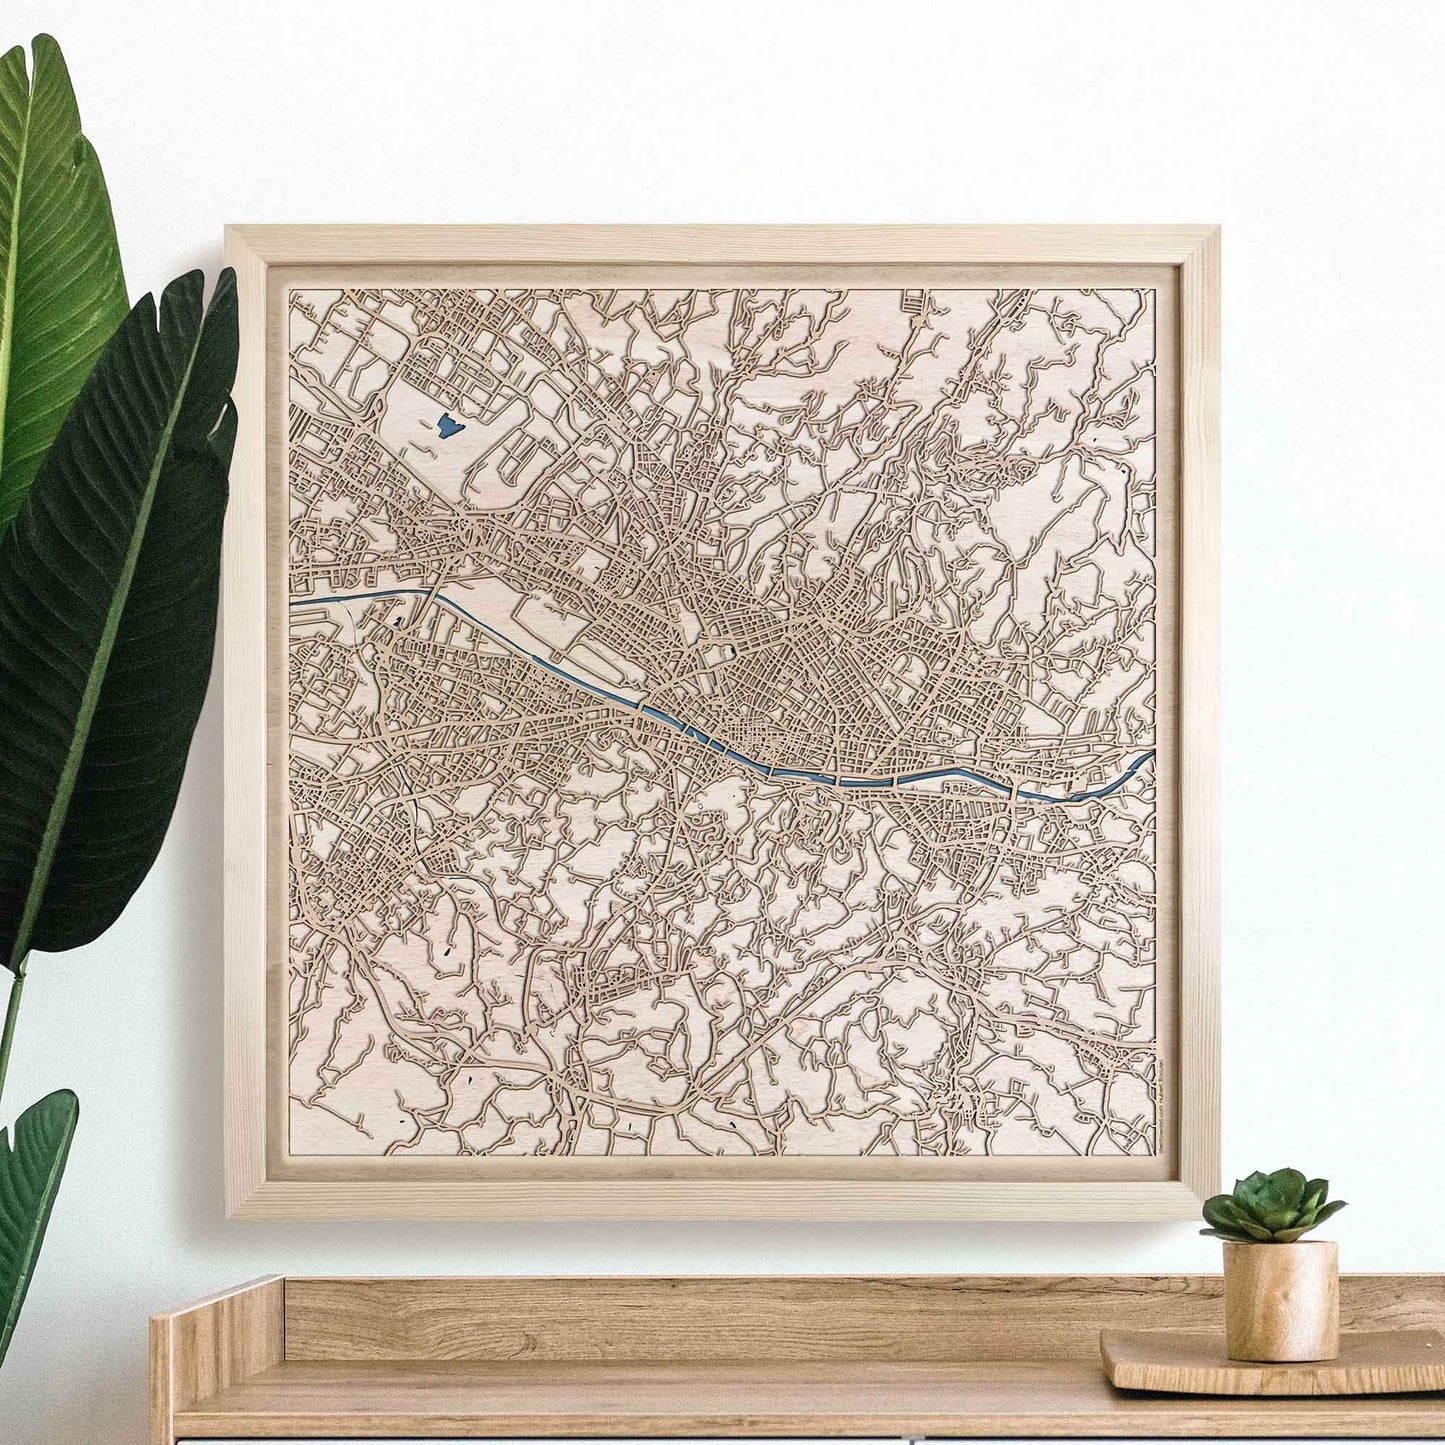 Florence Wooden Map by CityWood - Custom Wood Map Art - Unique Laser Cut Engraved - Anniversary Gift